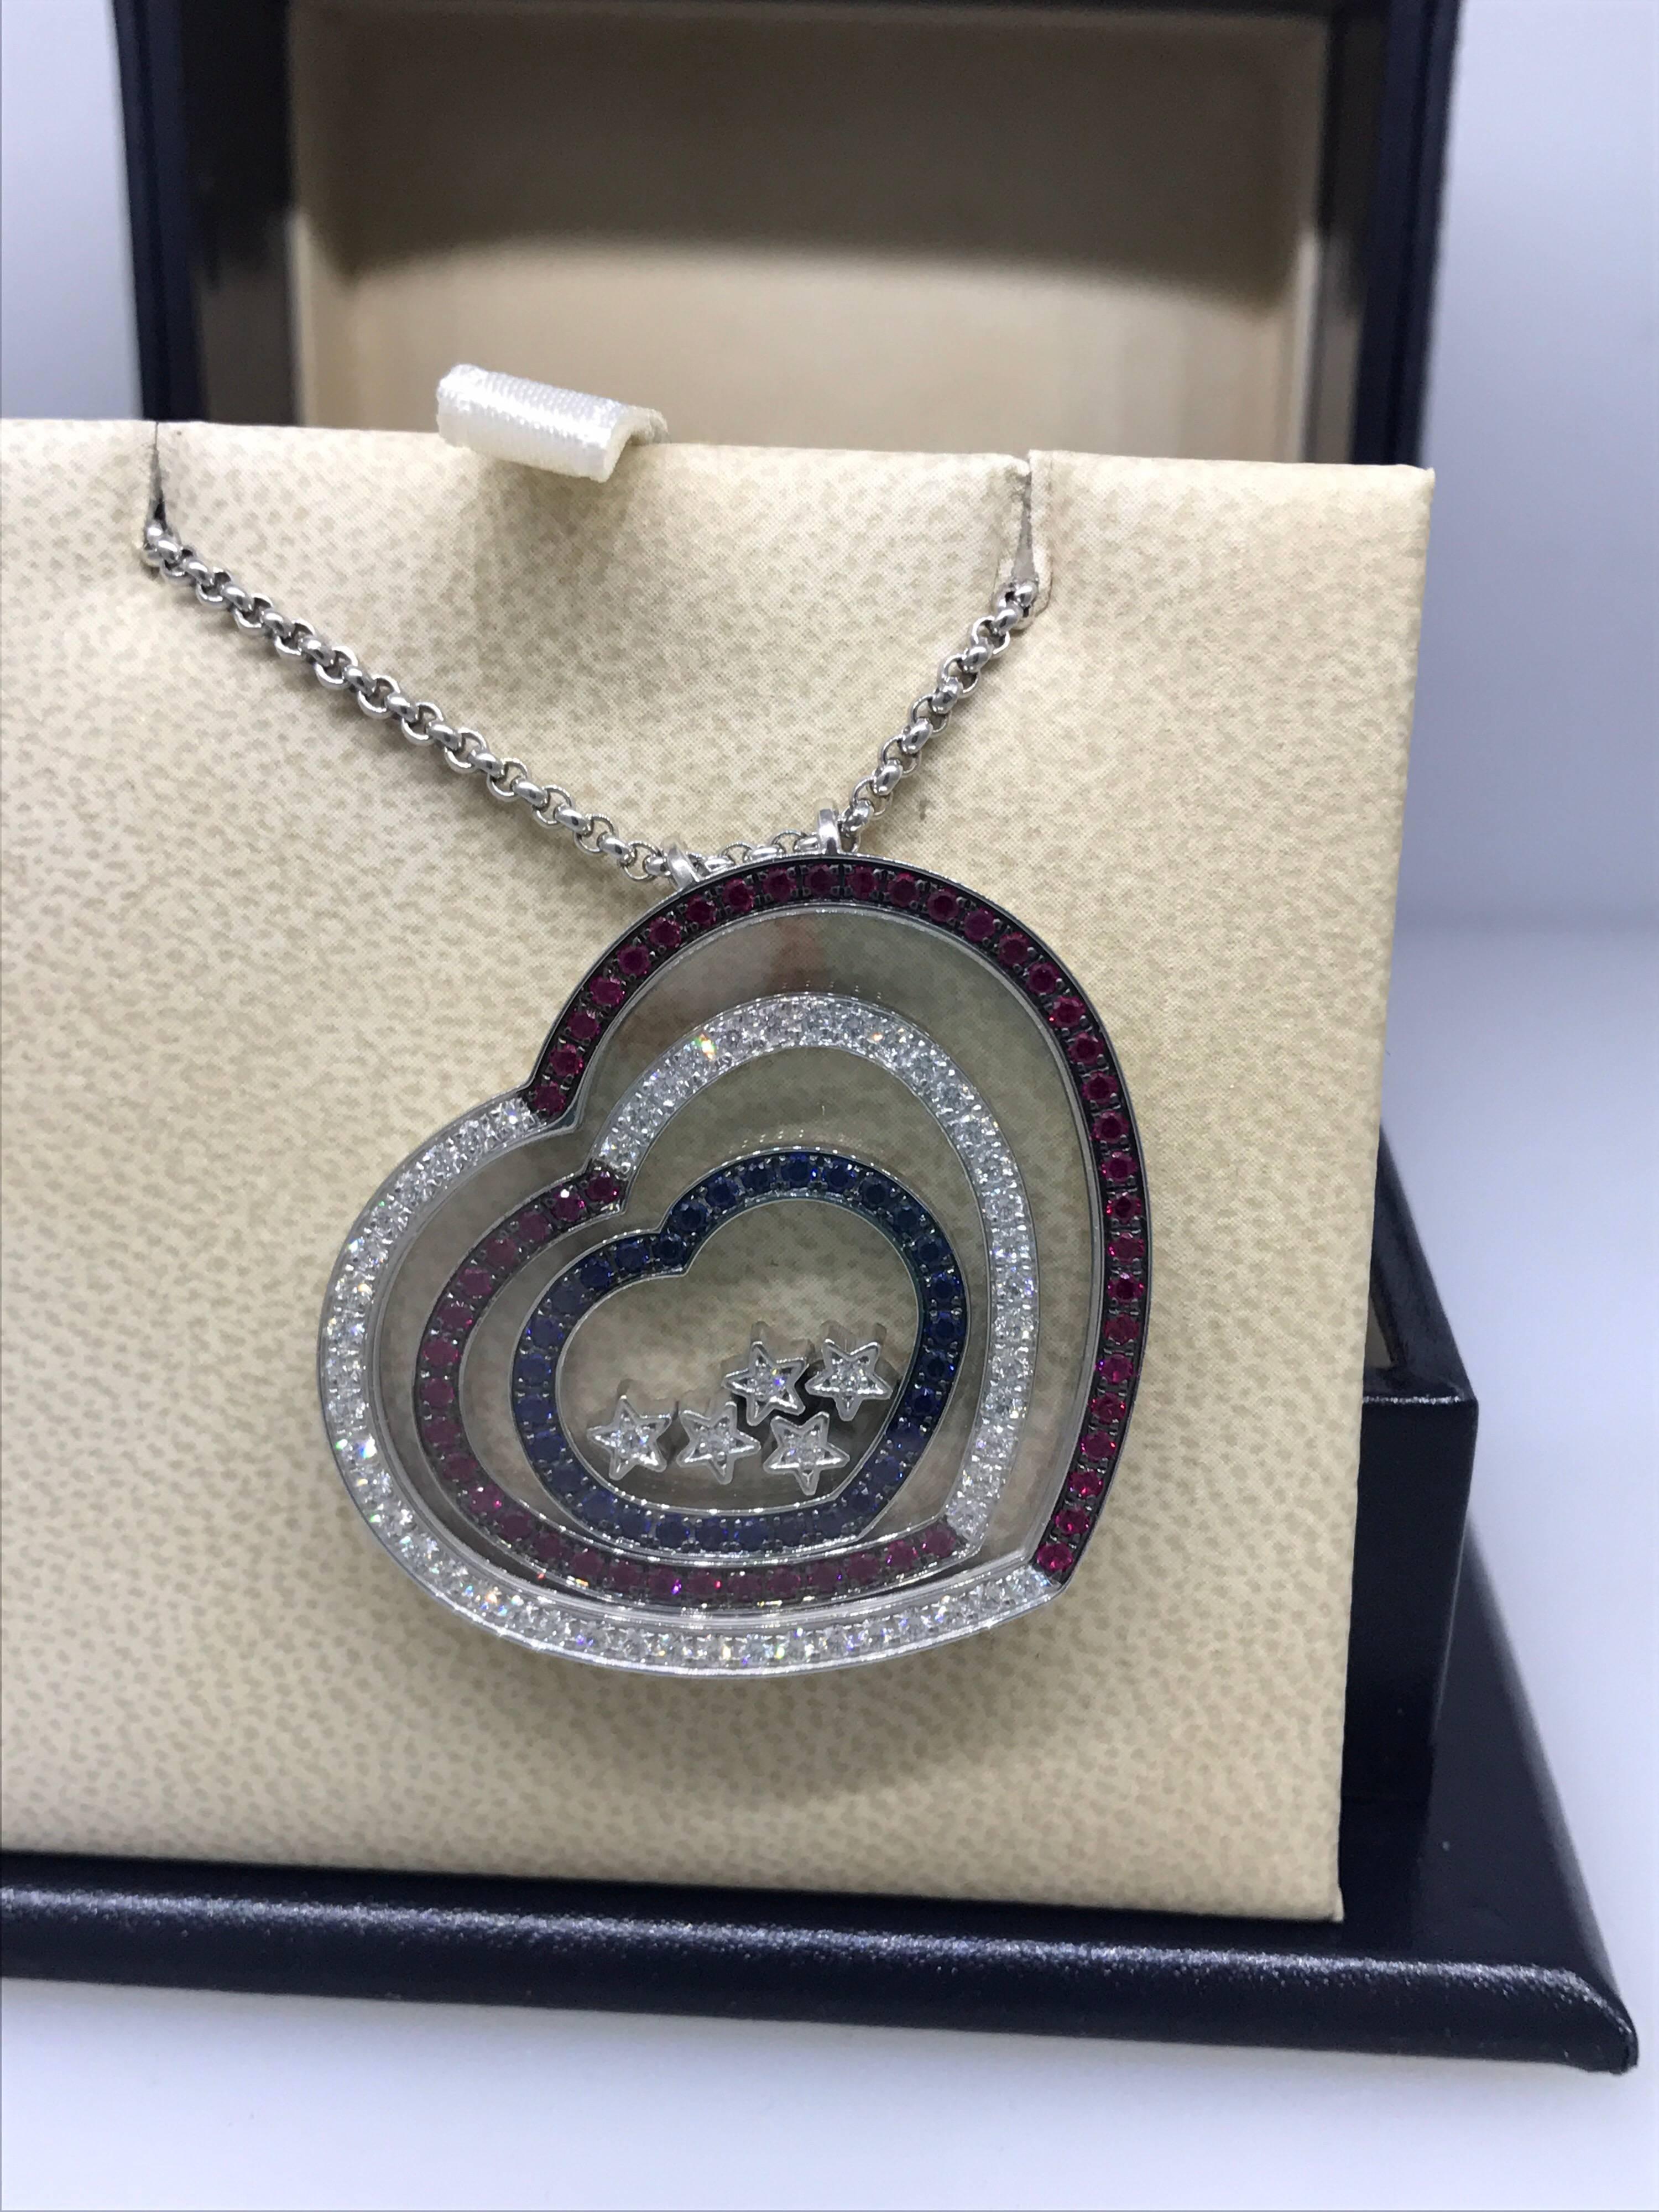 Chopard Happy Spirit Heats Pendant / Necklace

Model Number: 79/6282-20

100% Authentic

Brand New / Old Stock

Comes with original Chopard box, certificate of authenticity and warranty, and jewels manual

18 Karat White Gold

57 Diamonds on the